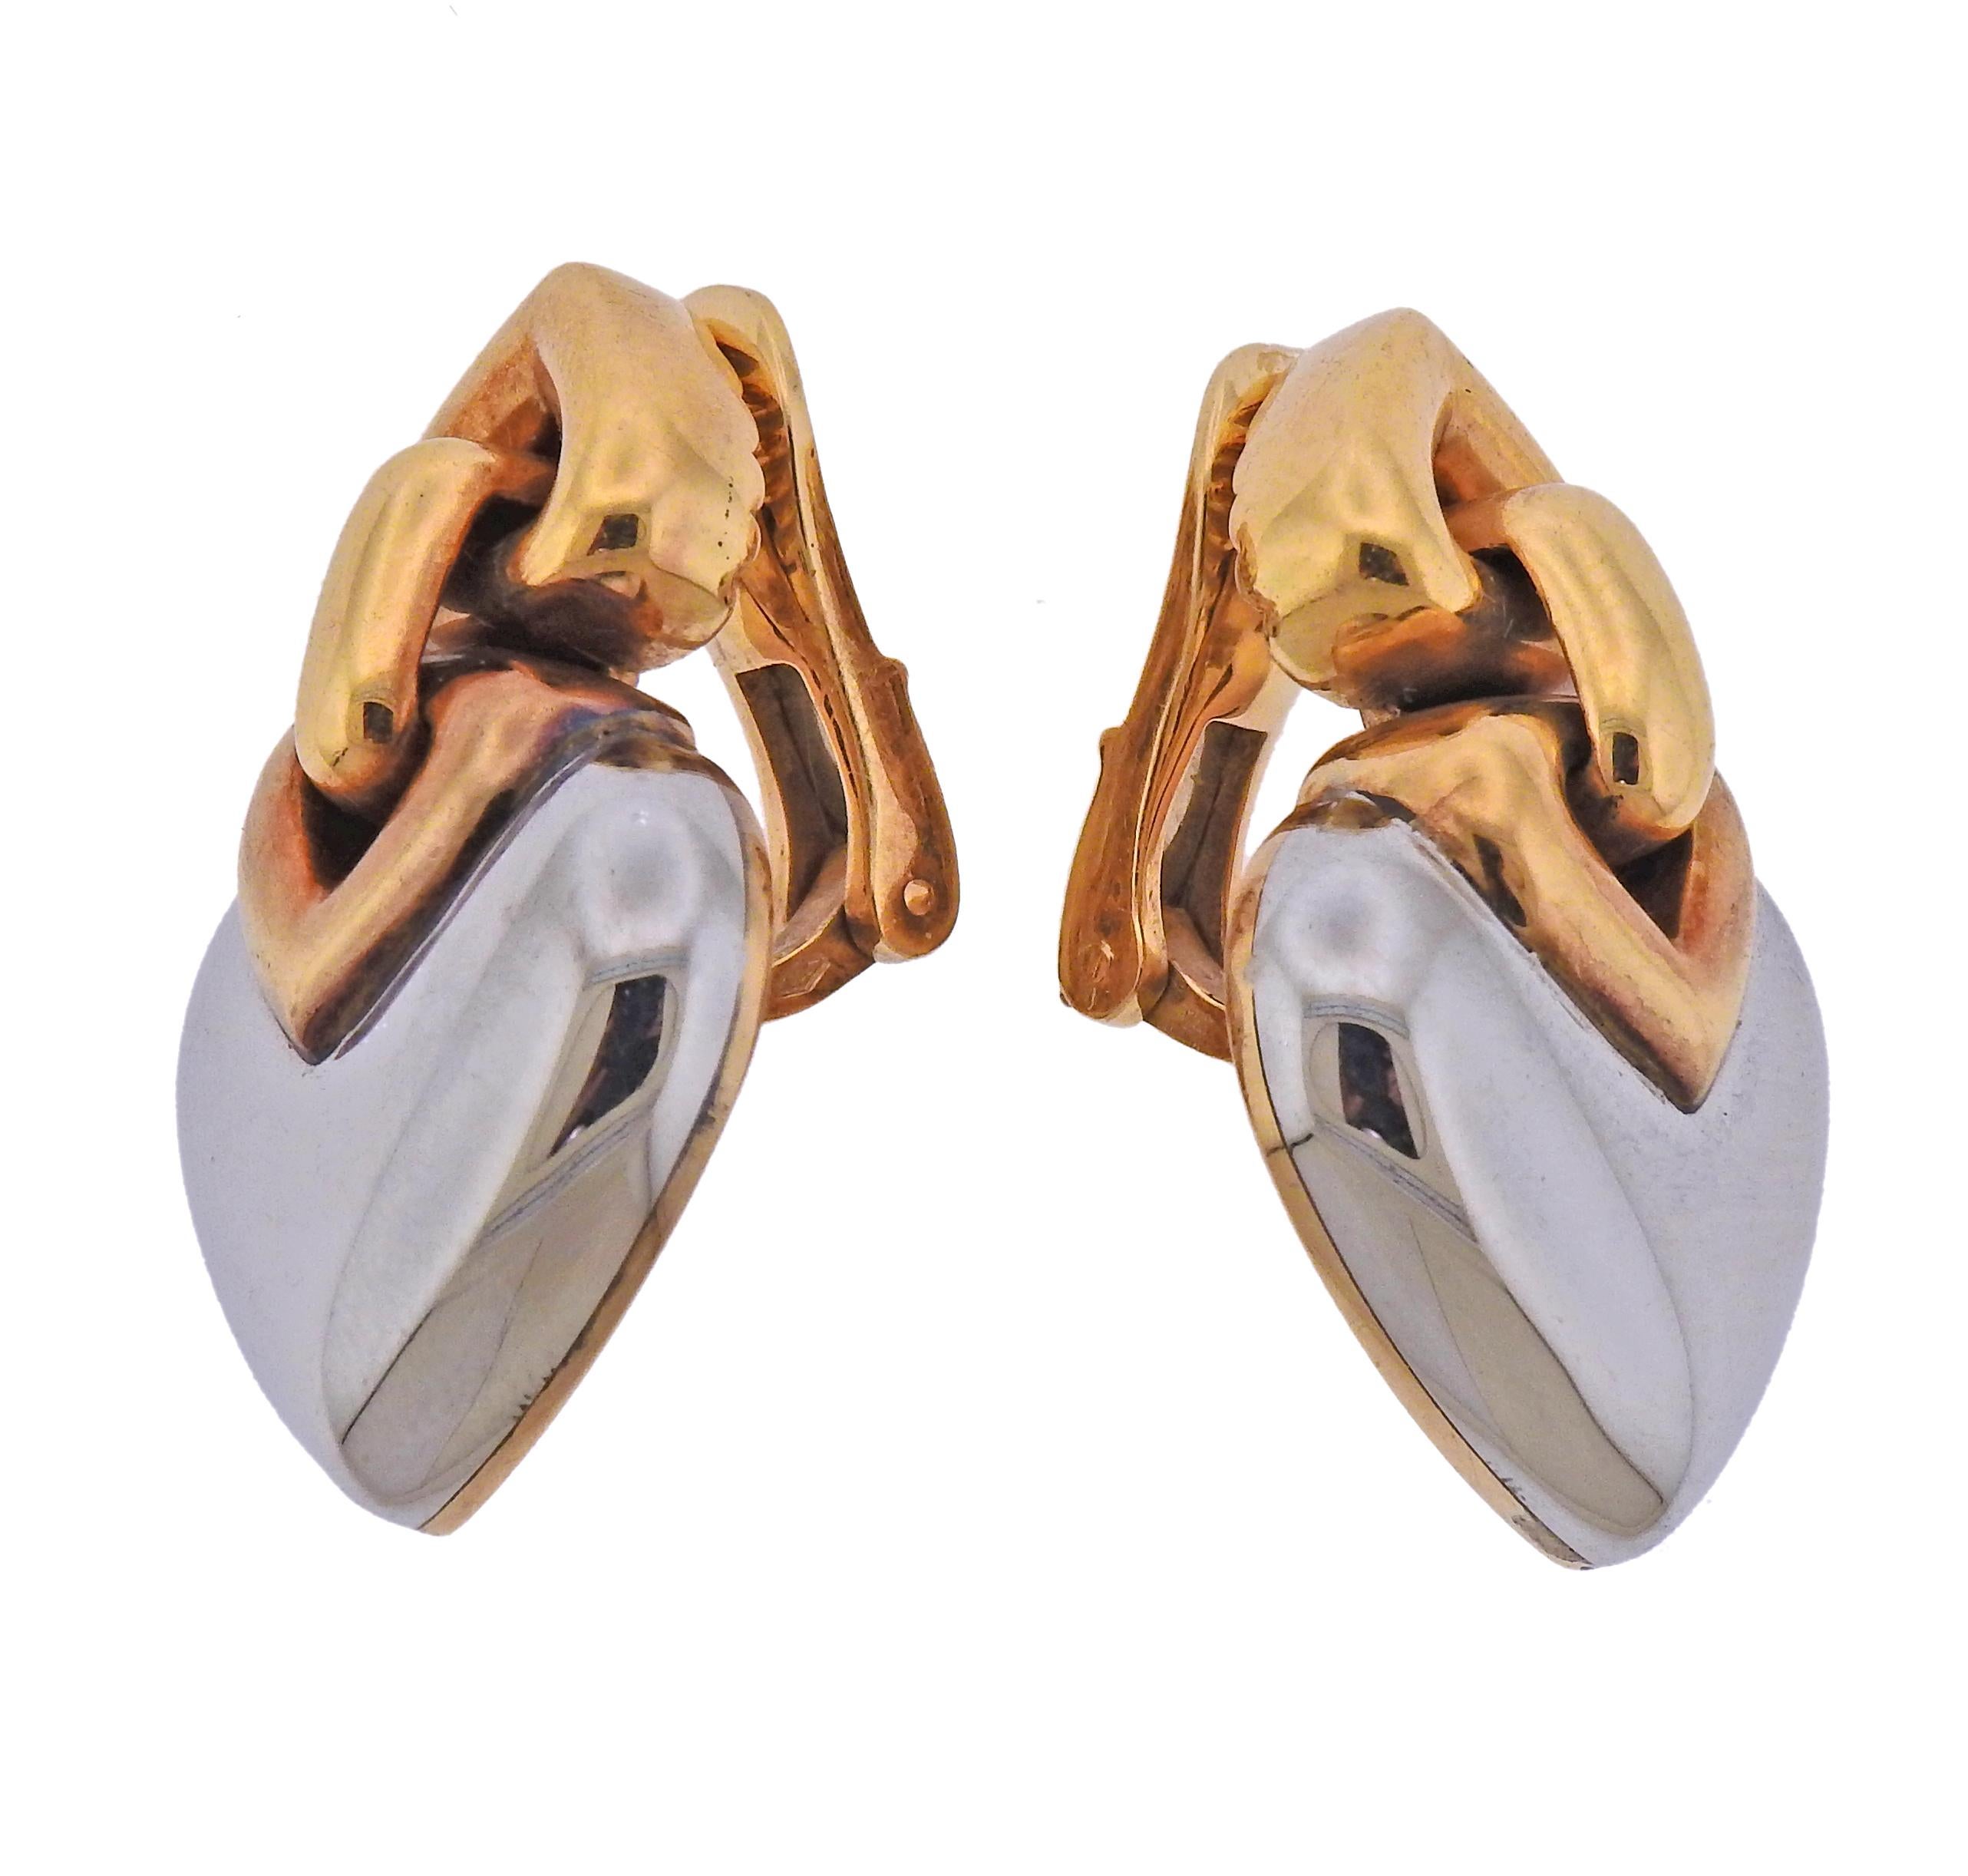 Pair of 18k gold and steel earrings by Bvlgari, from Doppio Cuore collection. Earrings are 32mm x 21mm. Weight - 32.1 grams. Marked: Bvlgari, 750, Acier el, Made in Italy.